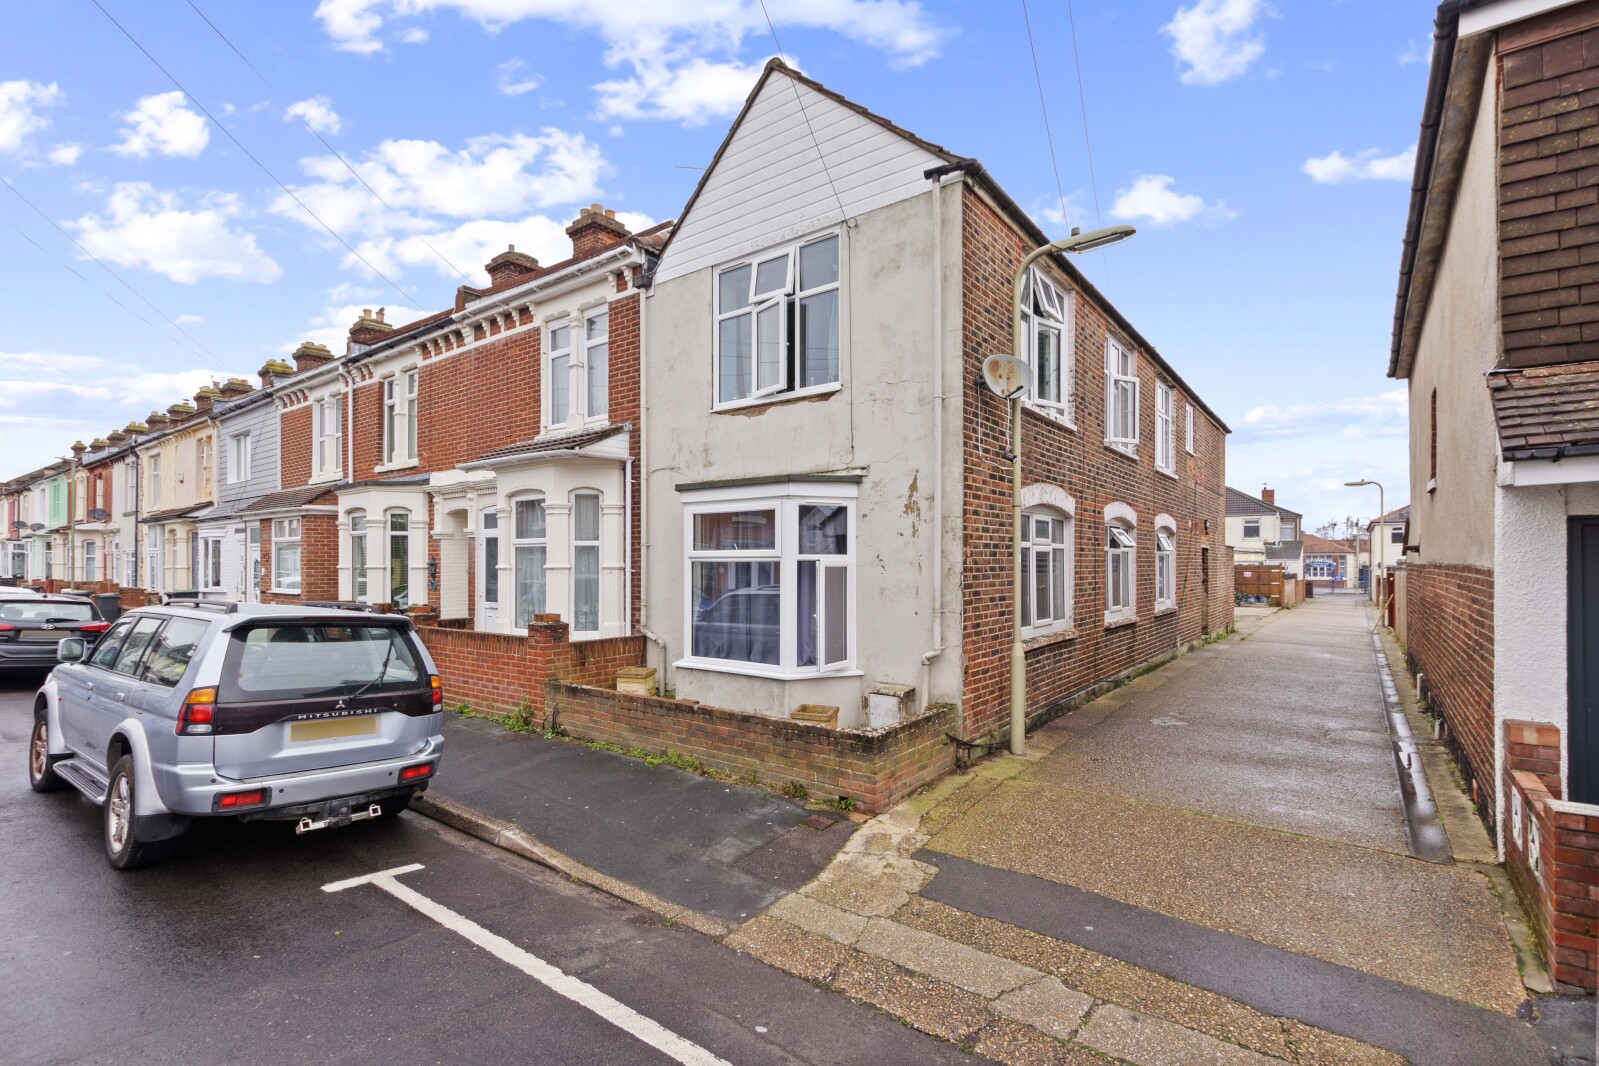 House for sale in Freemantle Road, Gosport - Property Image 1